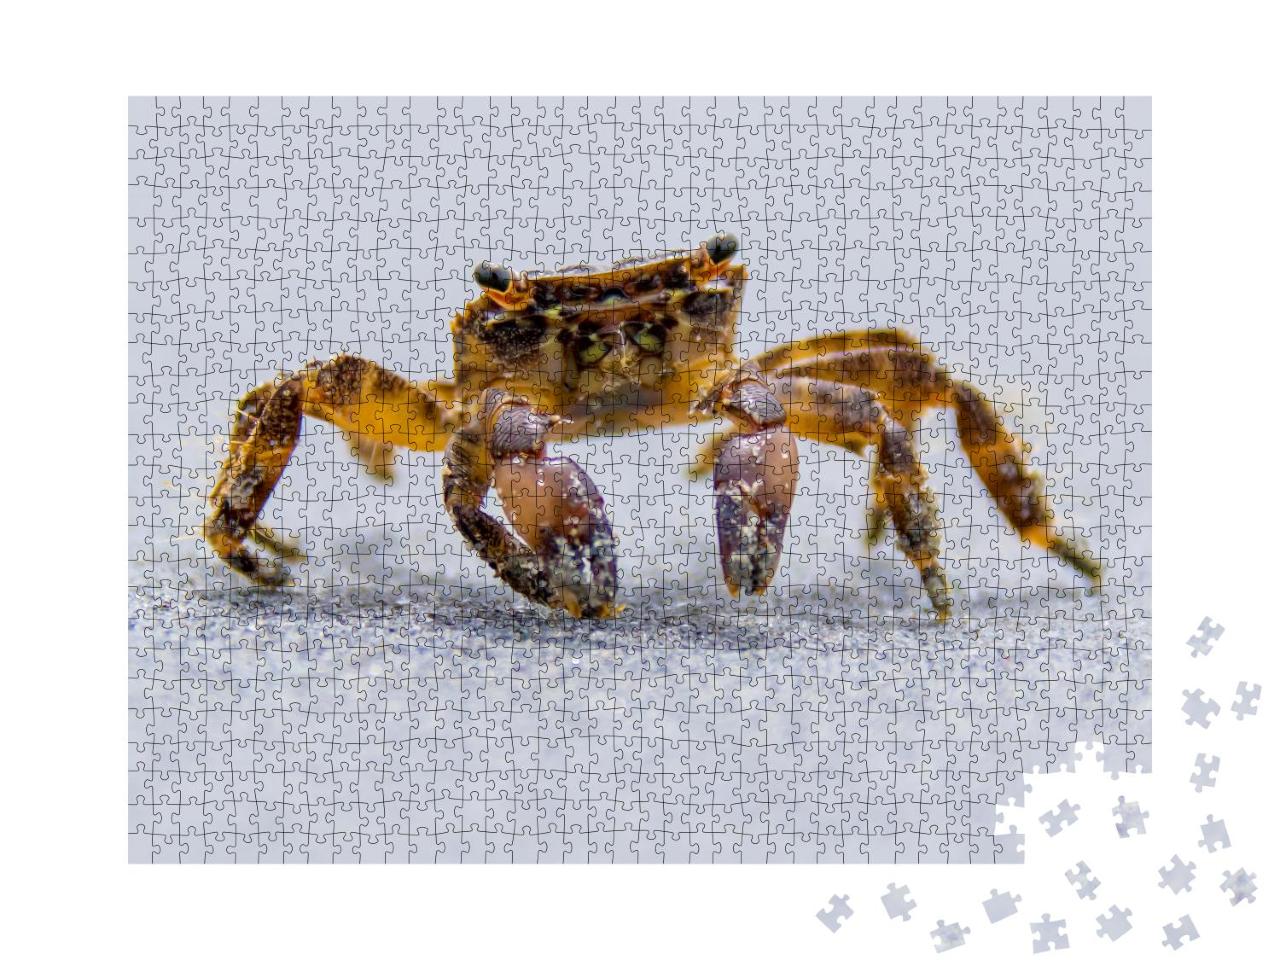 Puzzle 1000 Teile „Strandkrabbe beim Spaziergang am Meer“